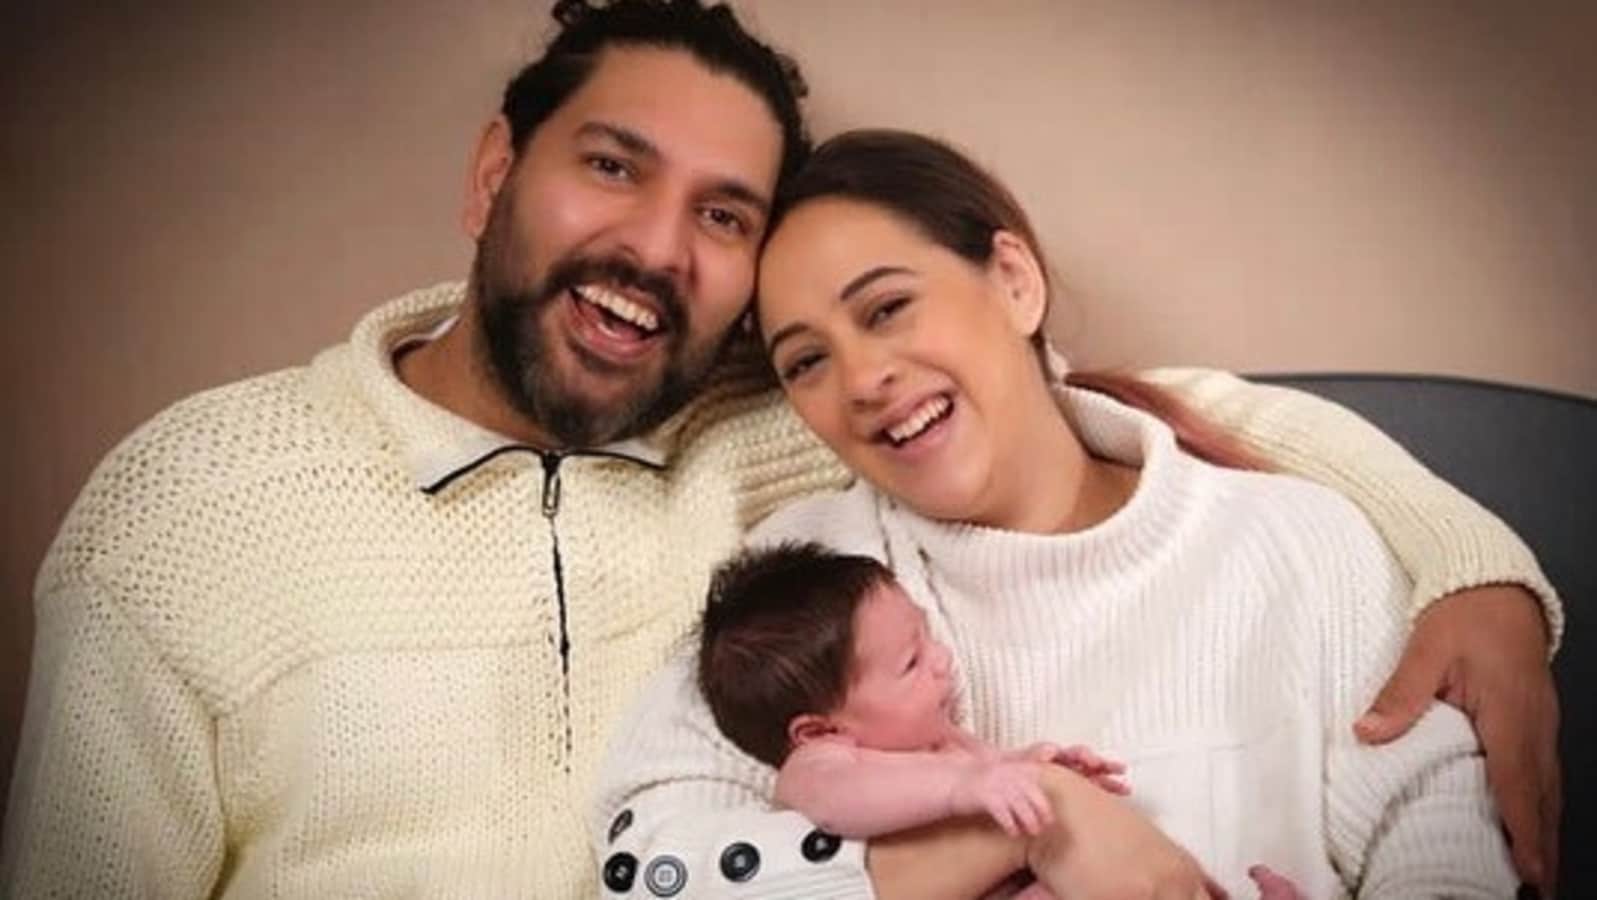 Hazel Keech and Yuvraj Singh share pics of their son Orion Keech Singh on Father’s Day. Here’s what his name means